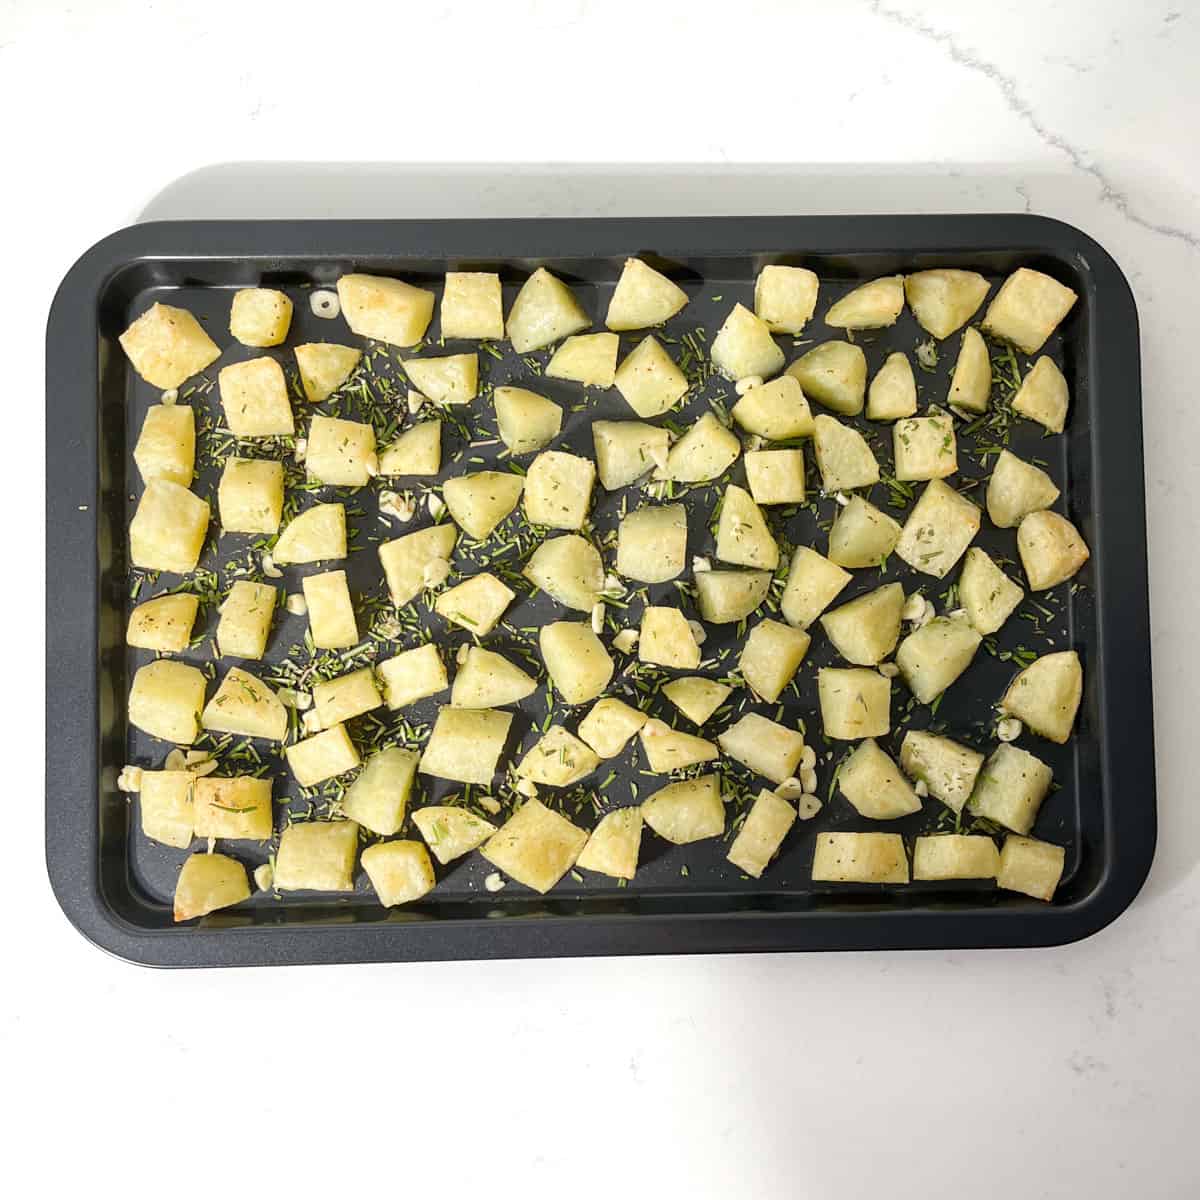 Partially cooked parmentier potatoes on a baking tray, sprinkled with garlic and rosemary.